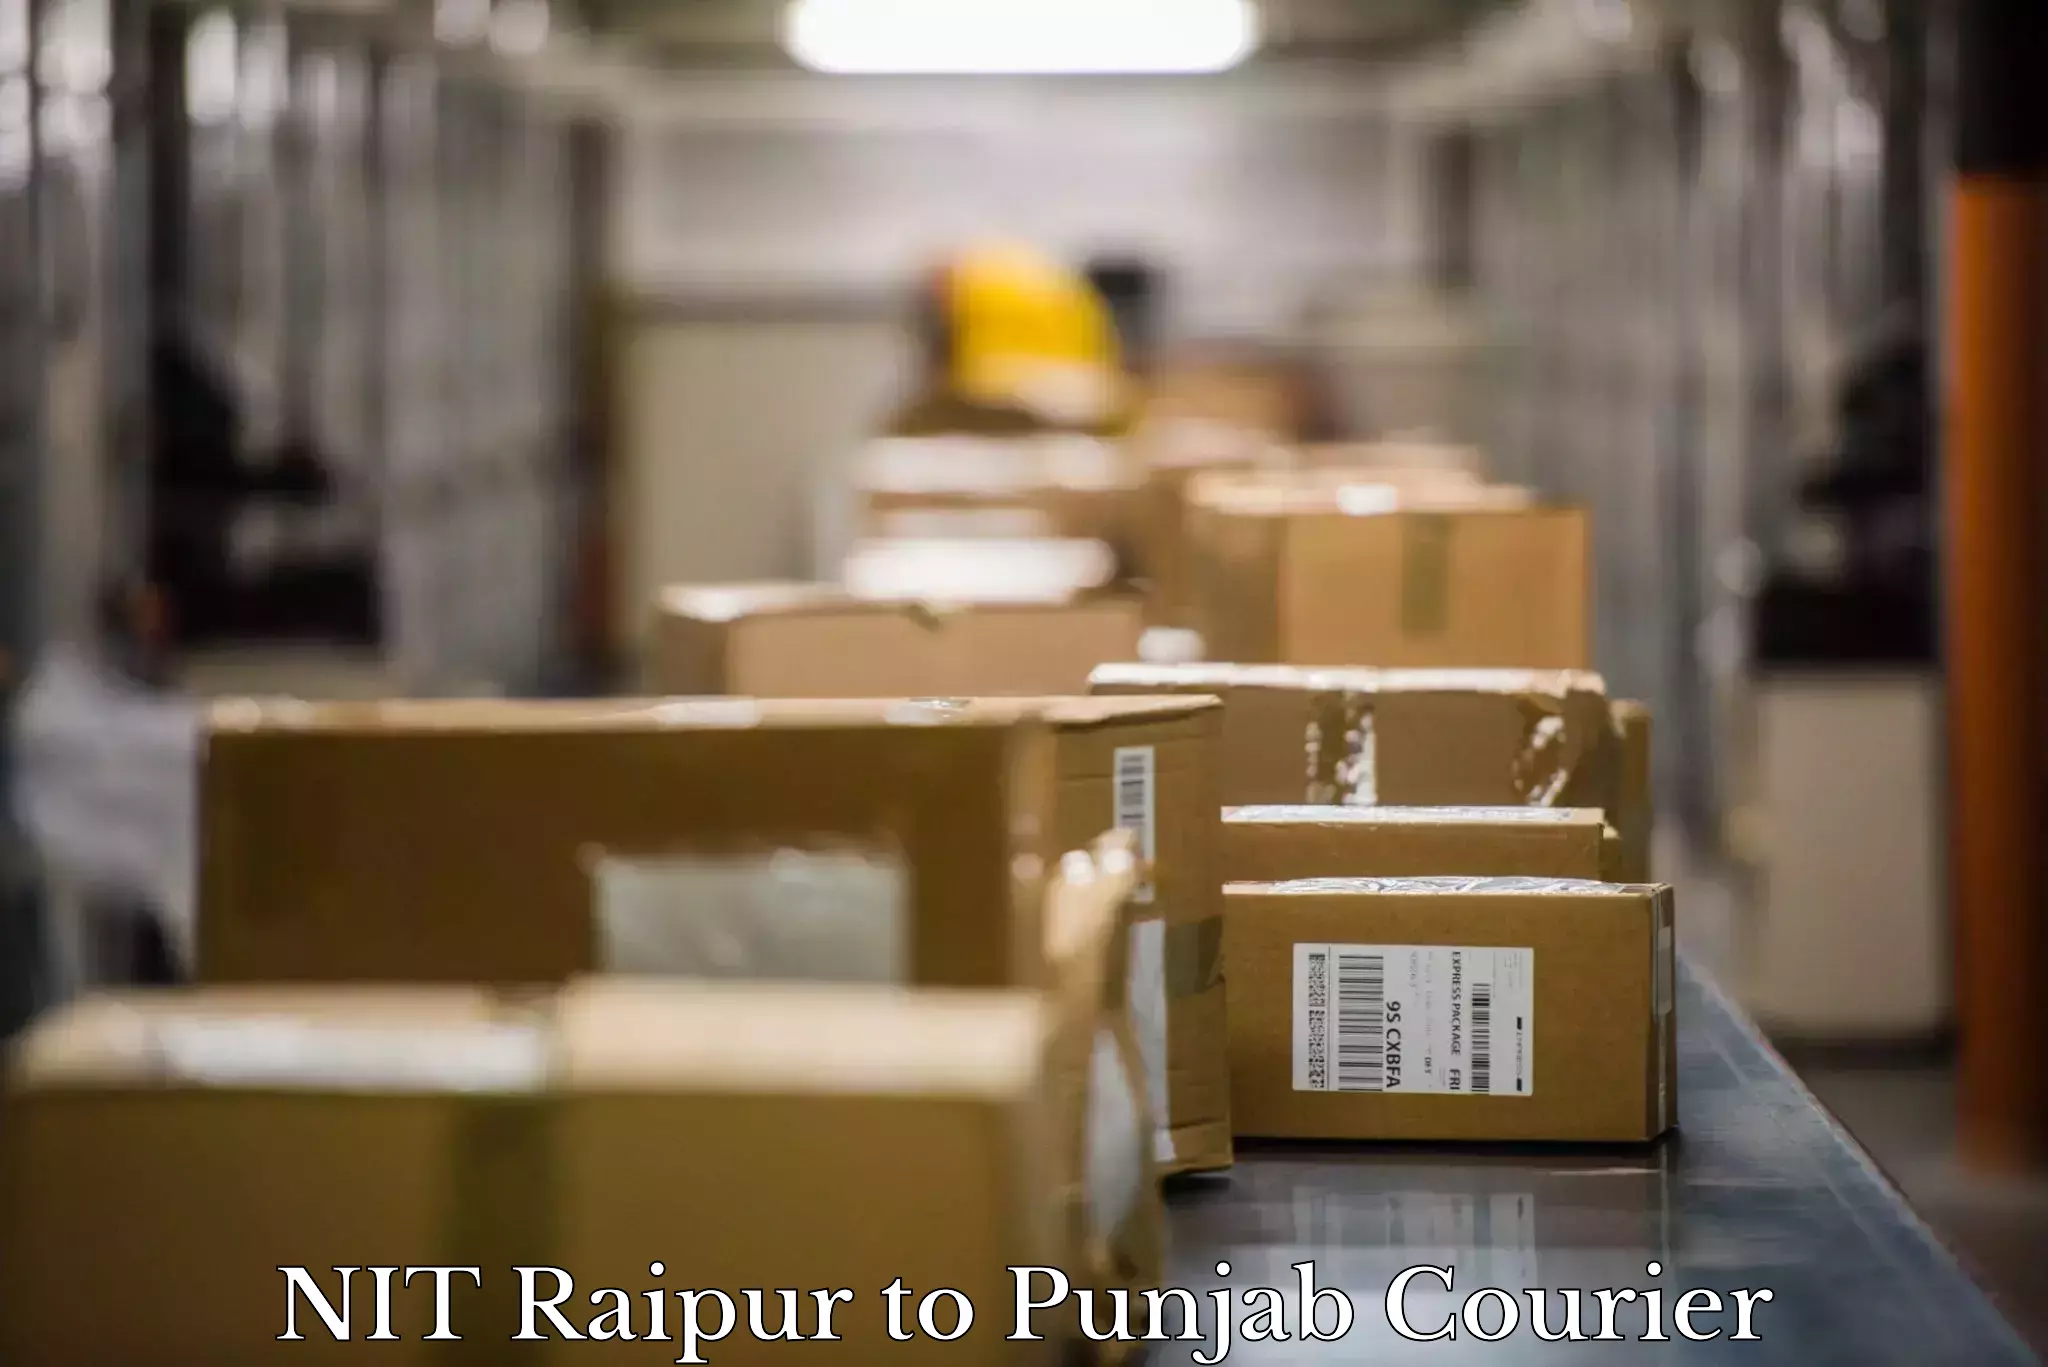 Full home relocation services NIT Raipur to Rajpura